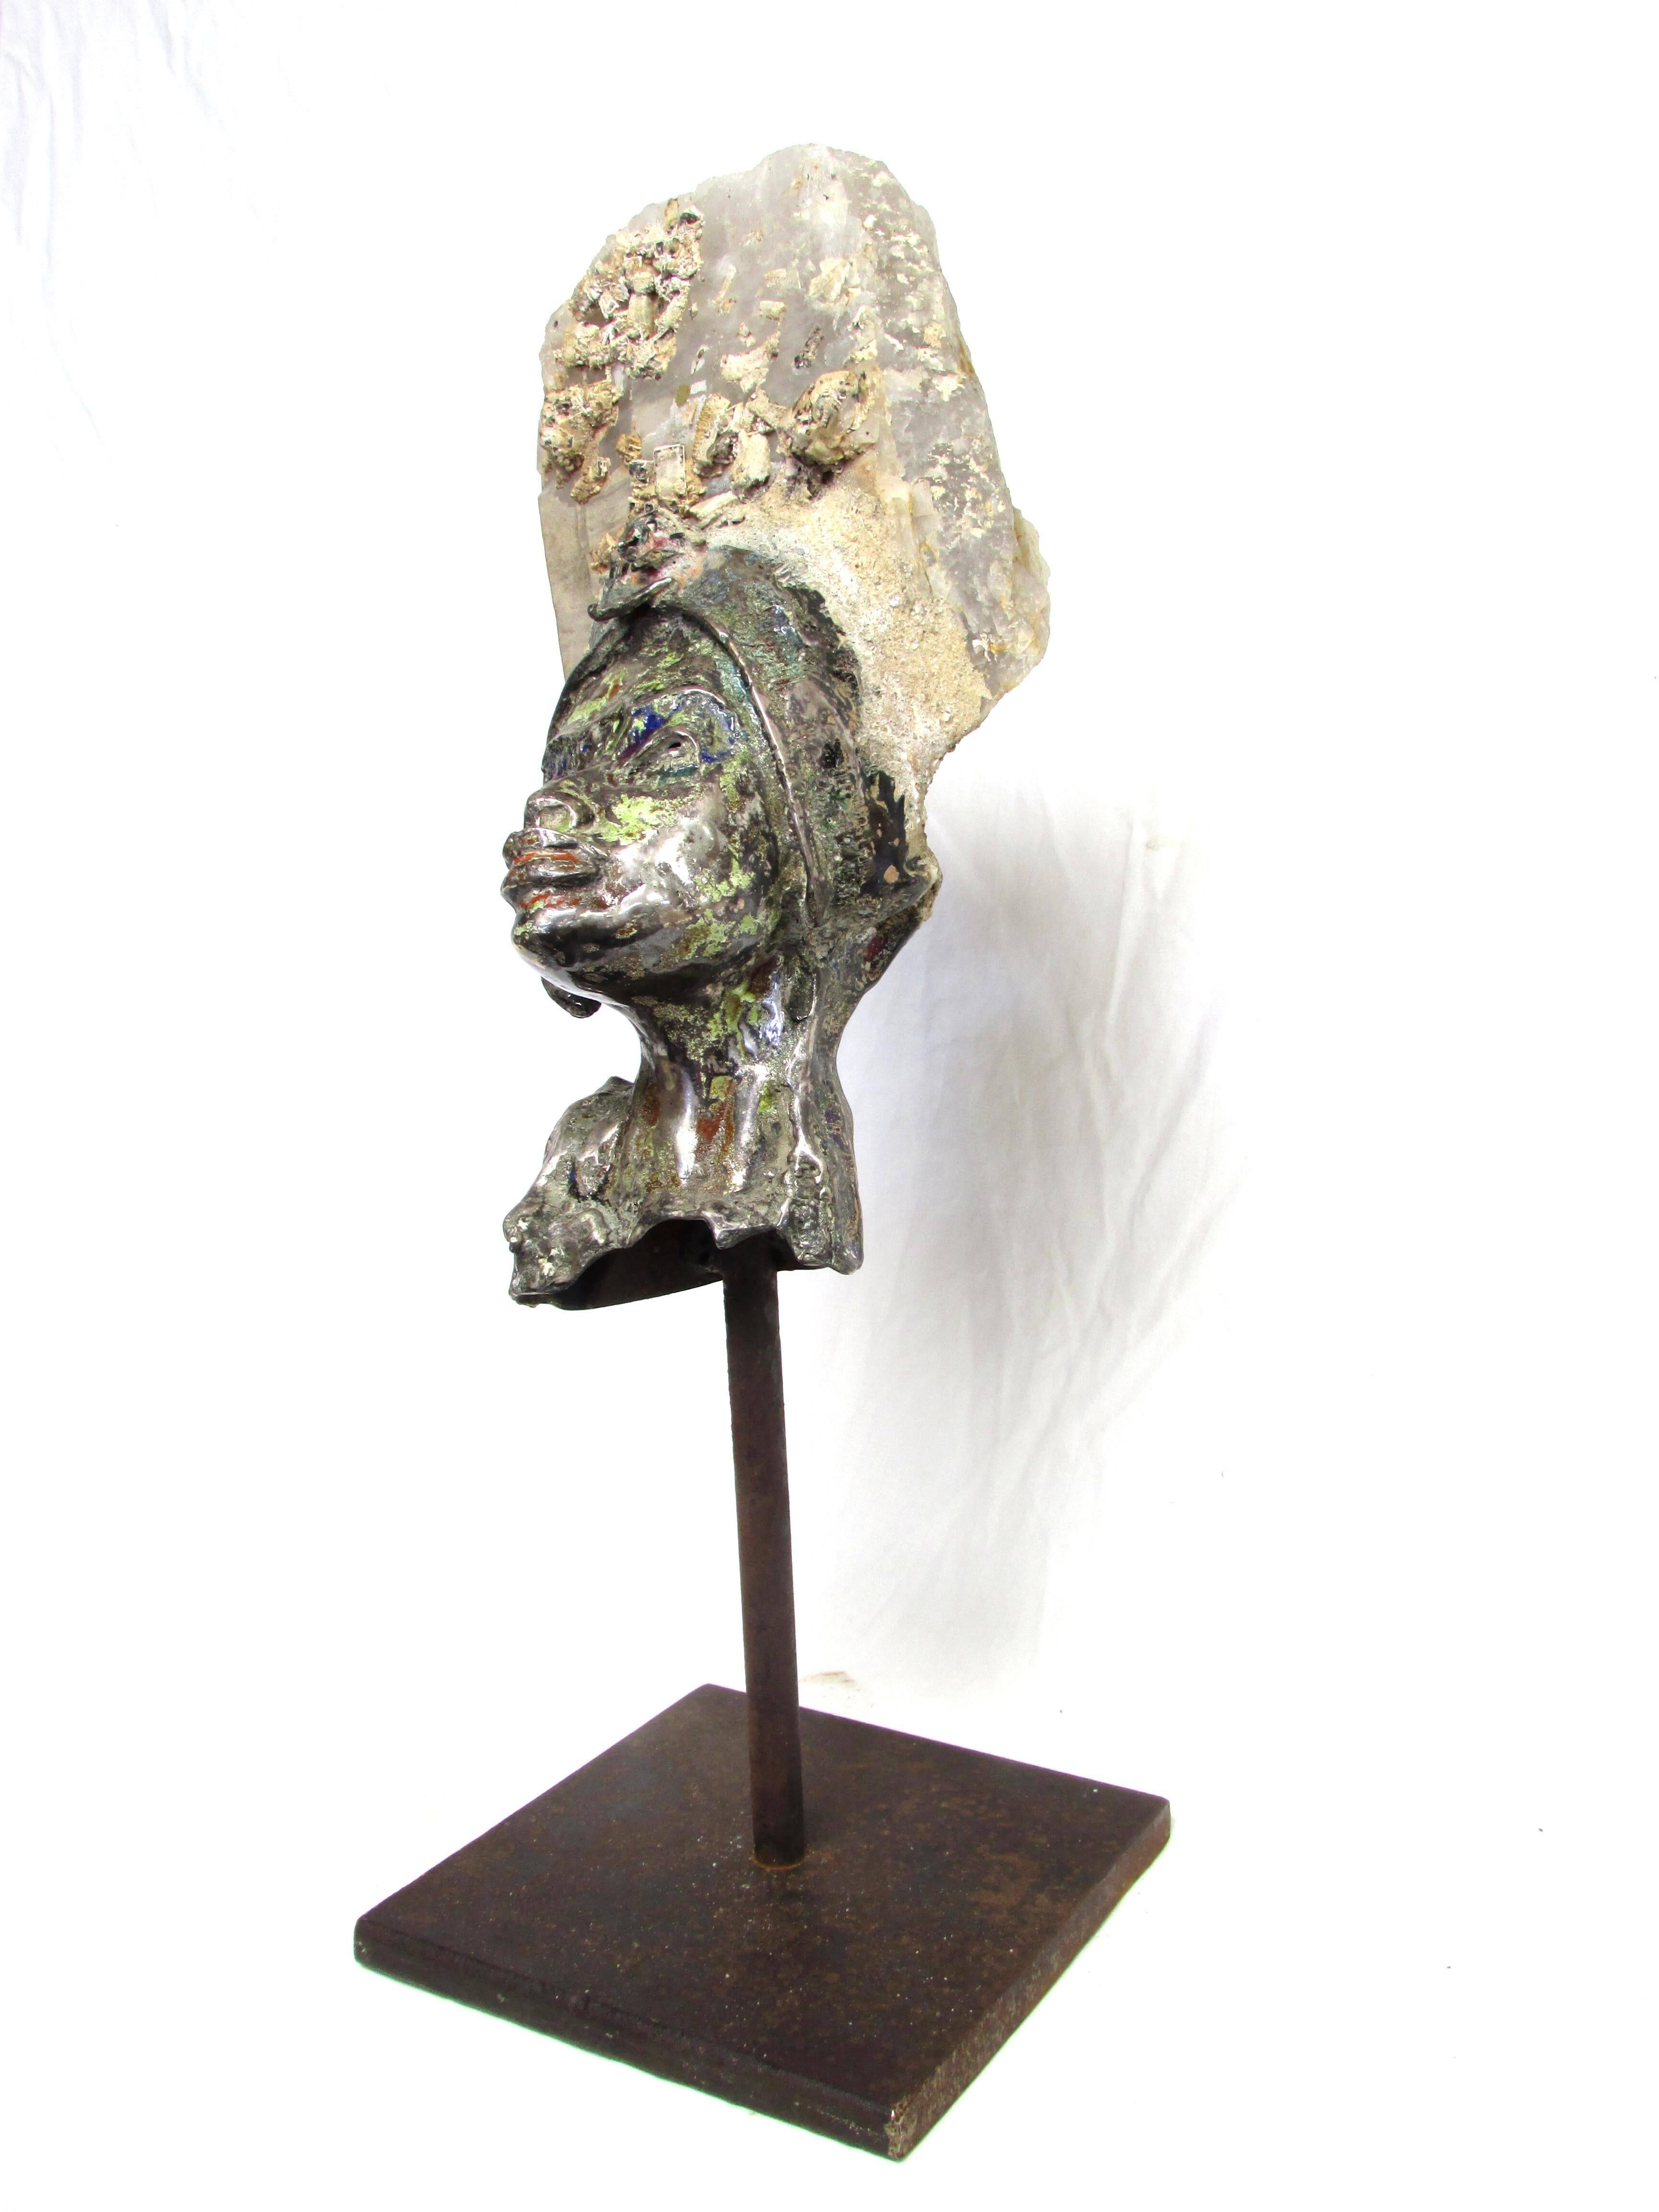 Beautiful Goddess with natural quartz headdress attached to silver head on a custom iron base by Aurelio Teno a Spanish sculptor.